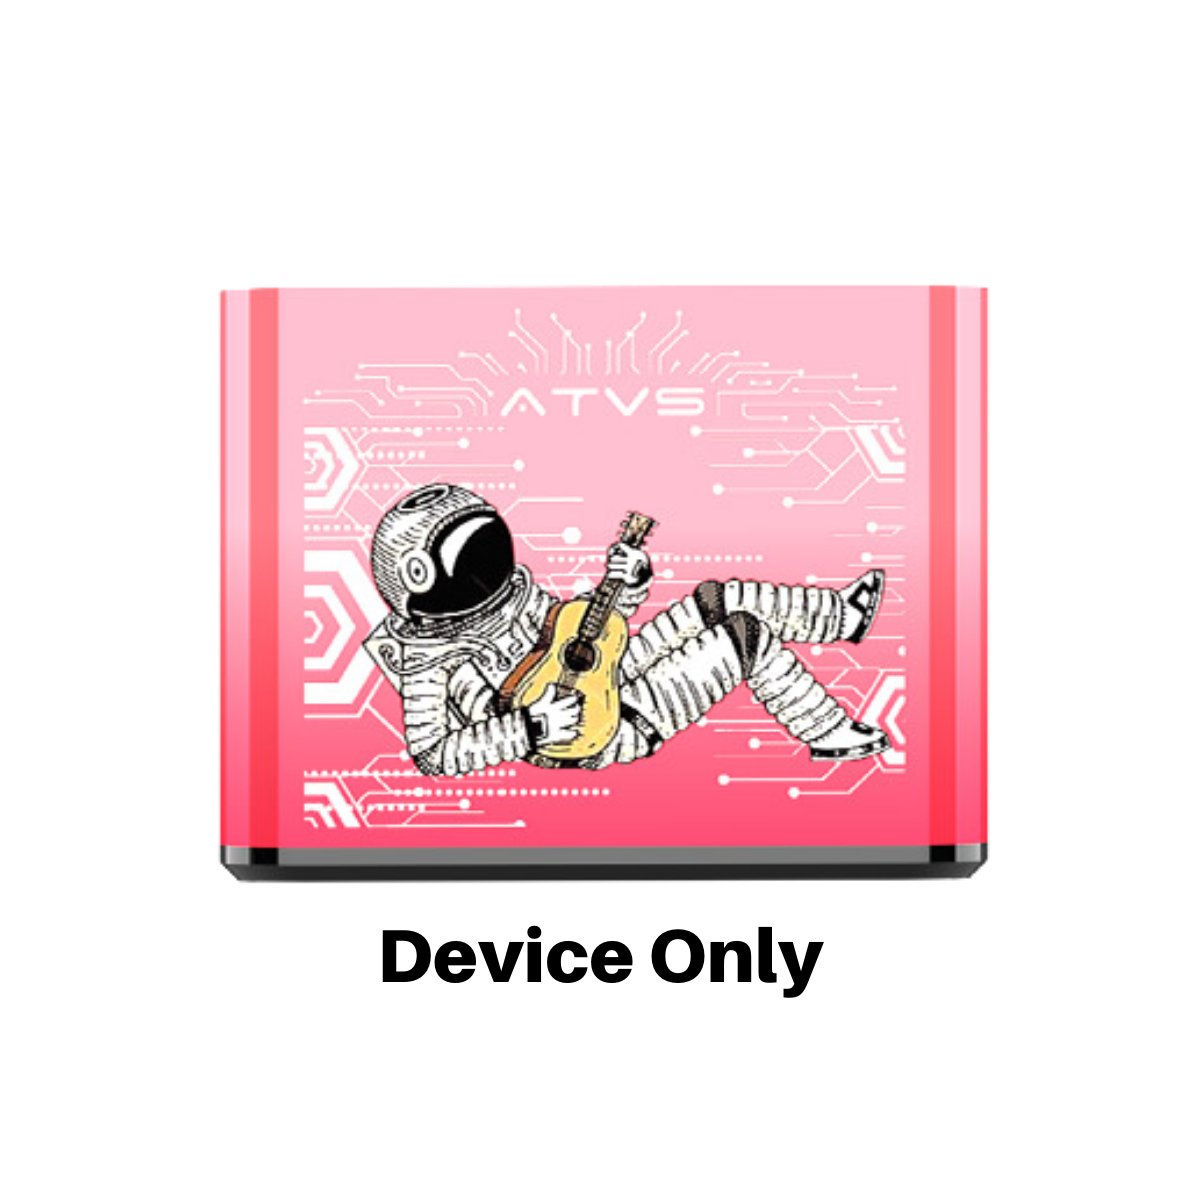 ATVS Rechargeable Device - Pink - Happy Hour